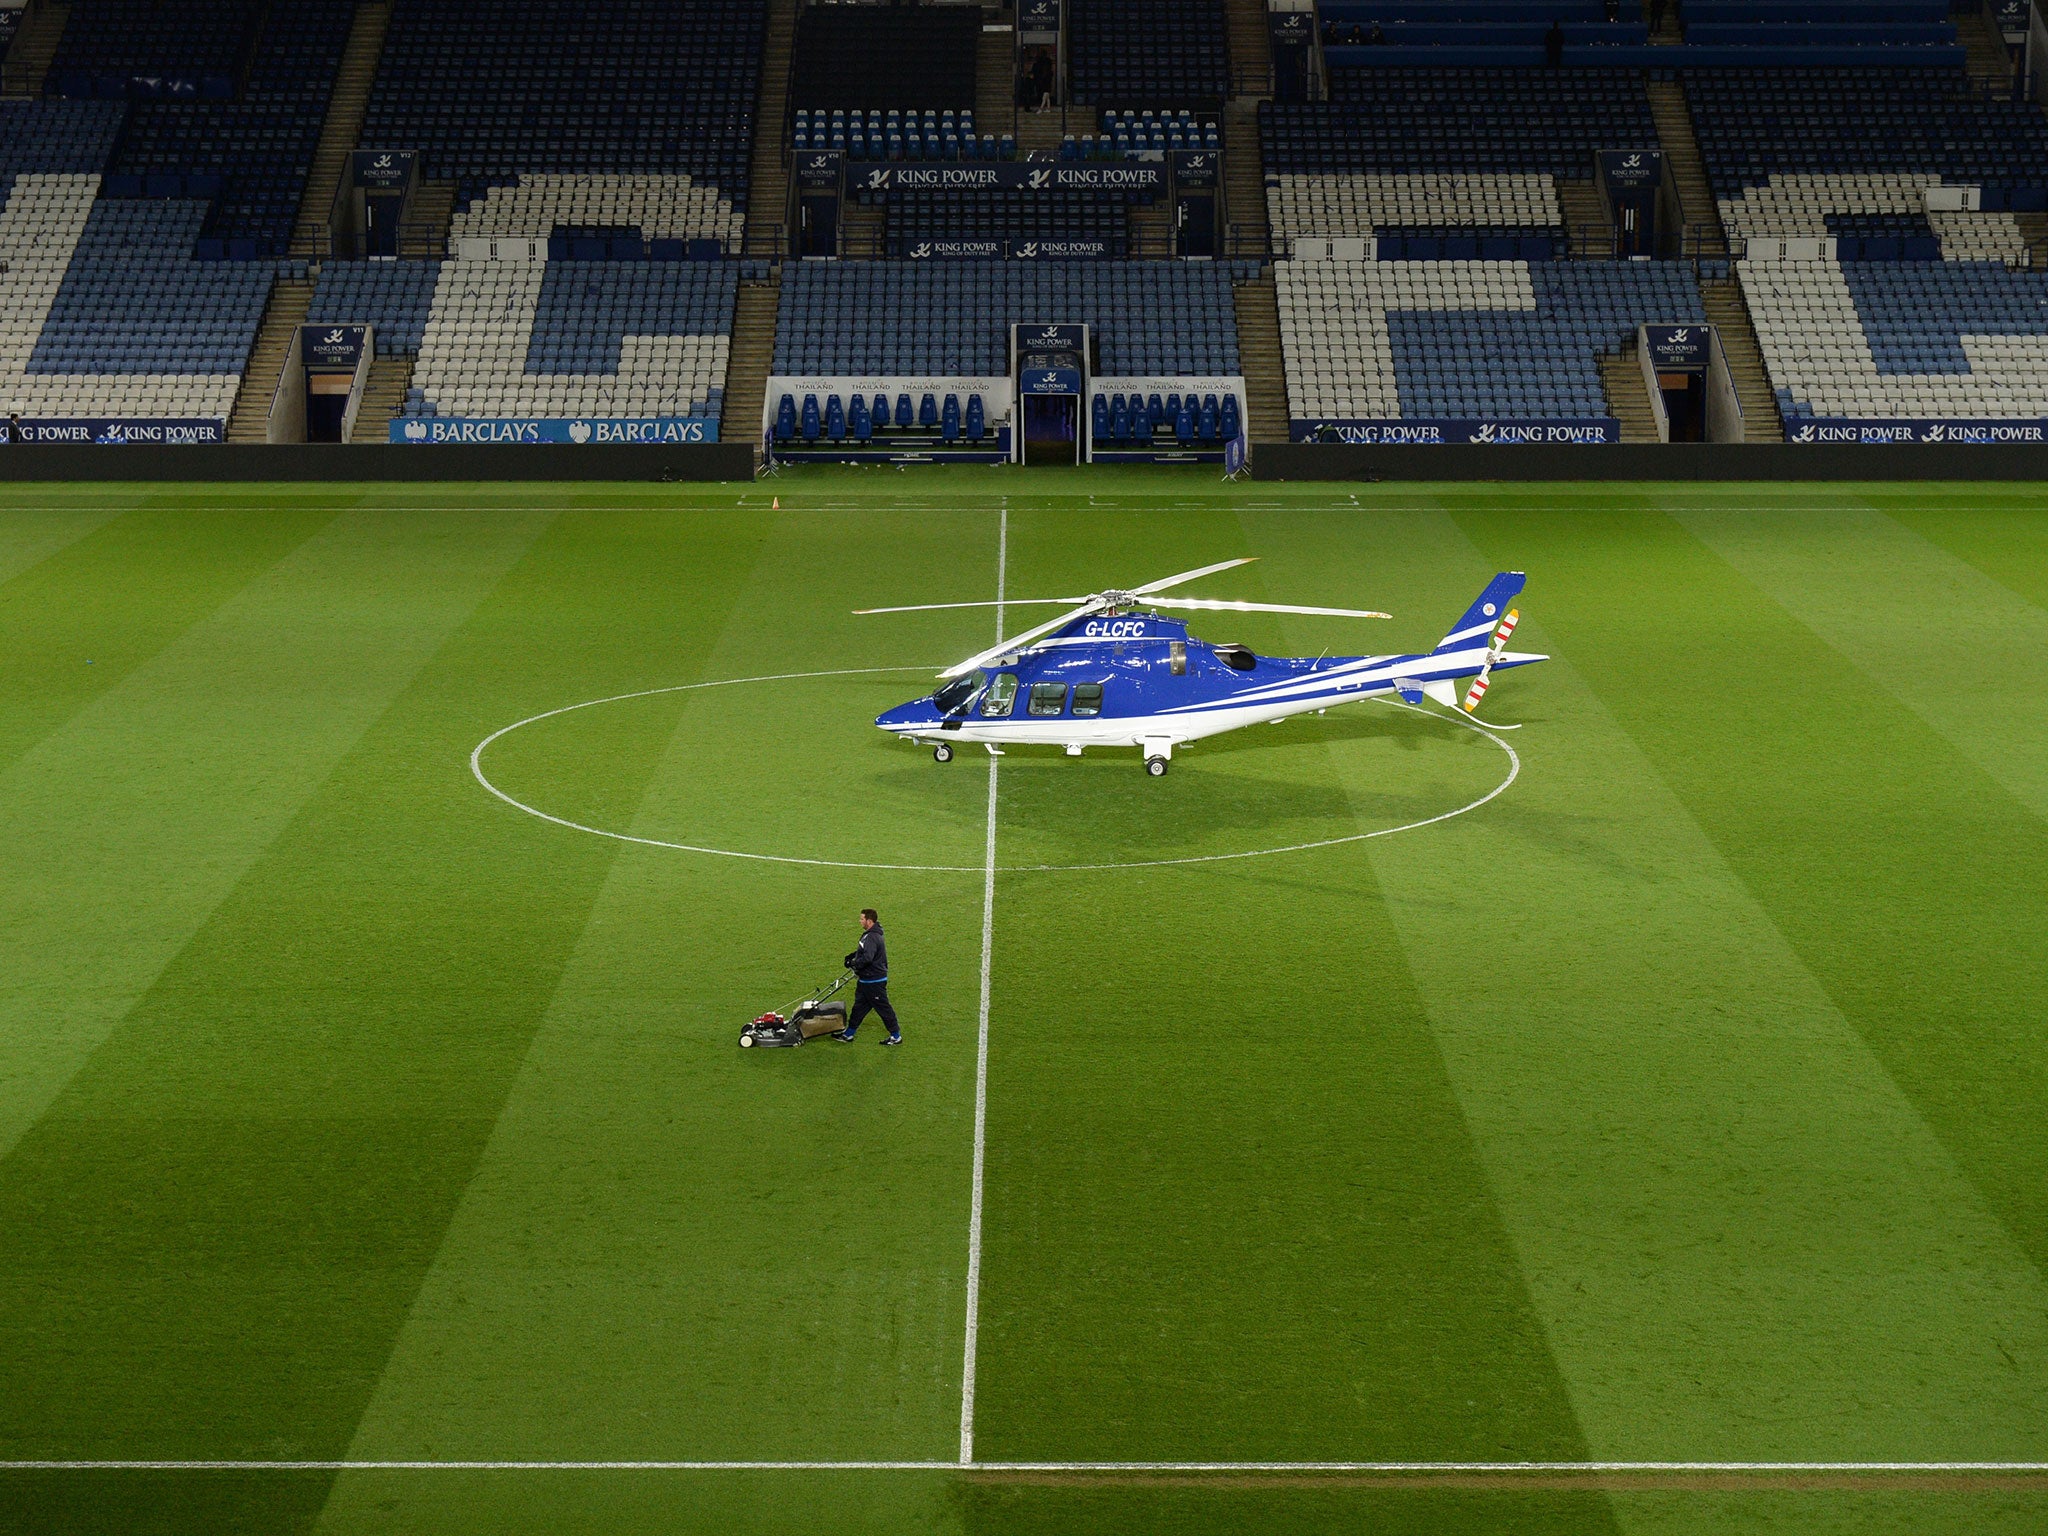 Vichai Srivaddhanaprabha's private helicopter lands on the King Power Stadium pitch